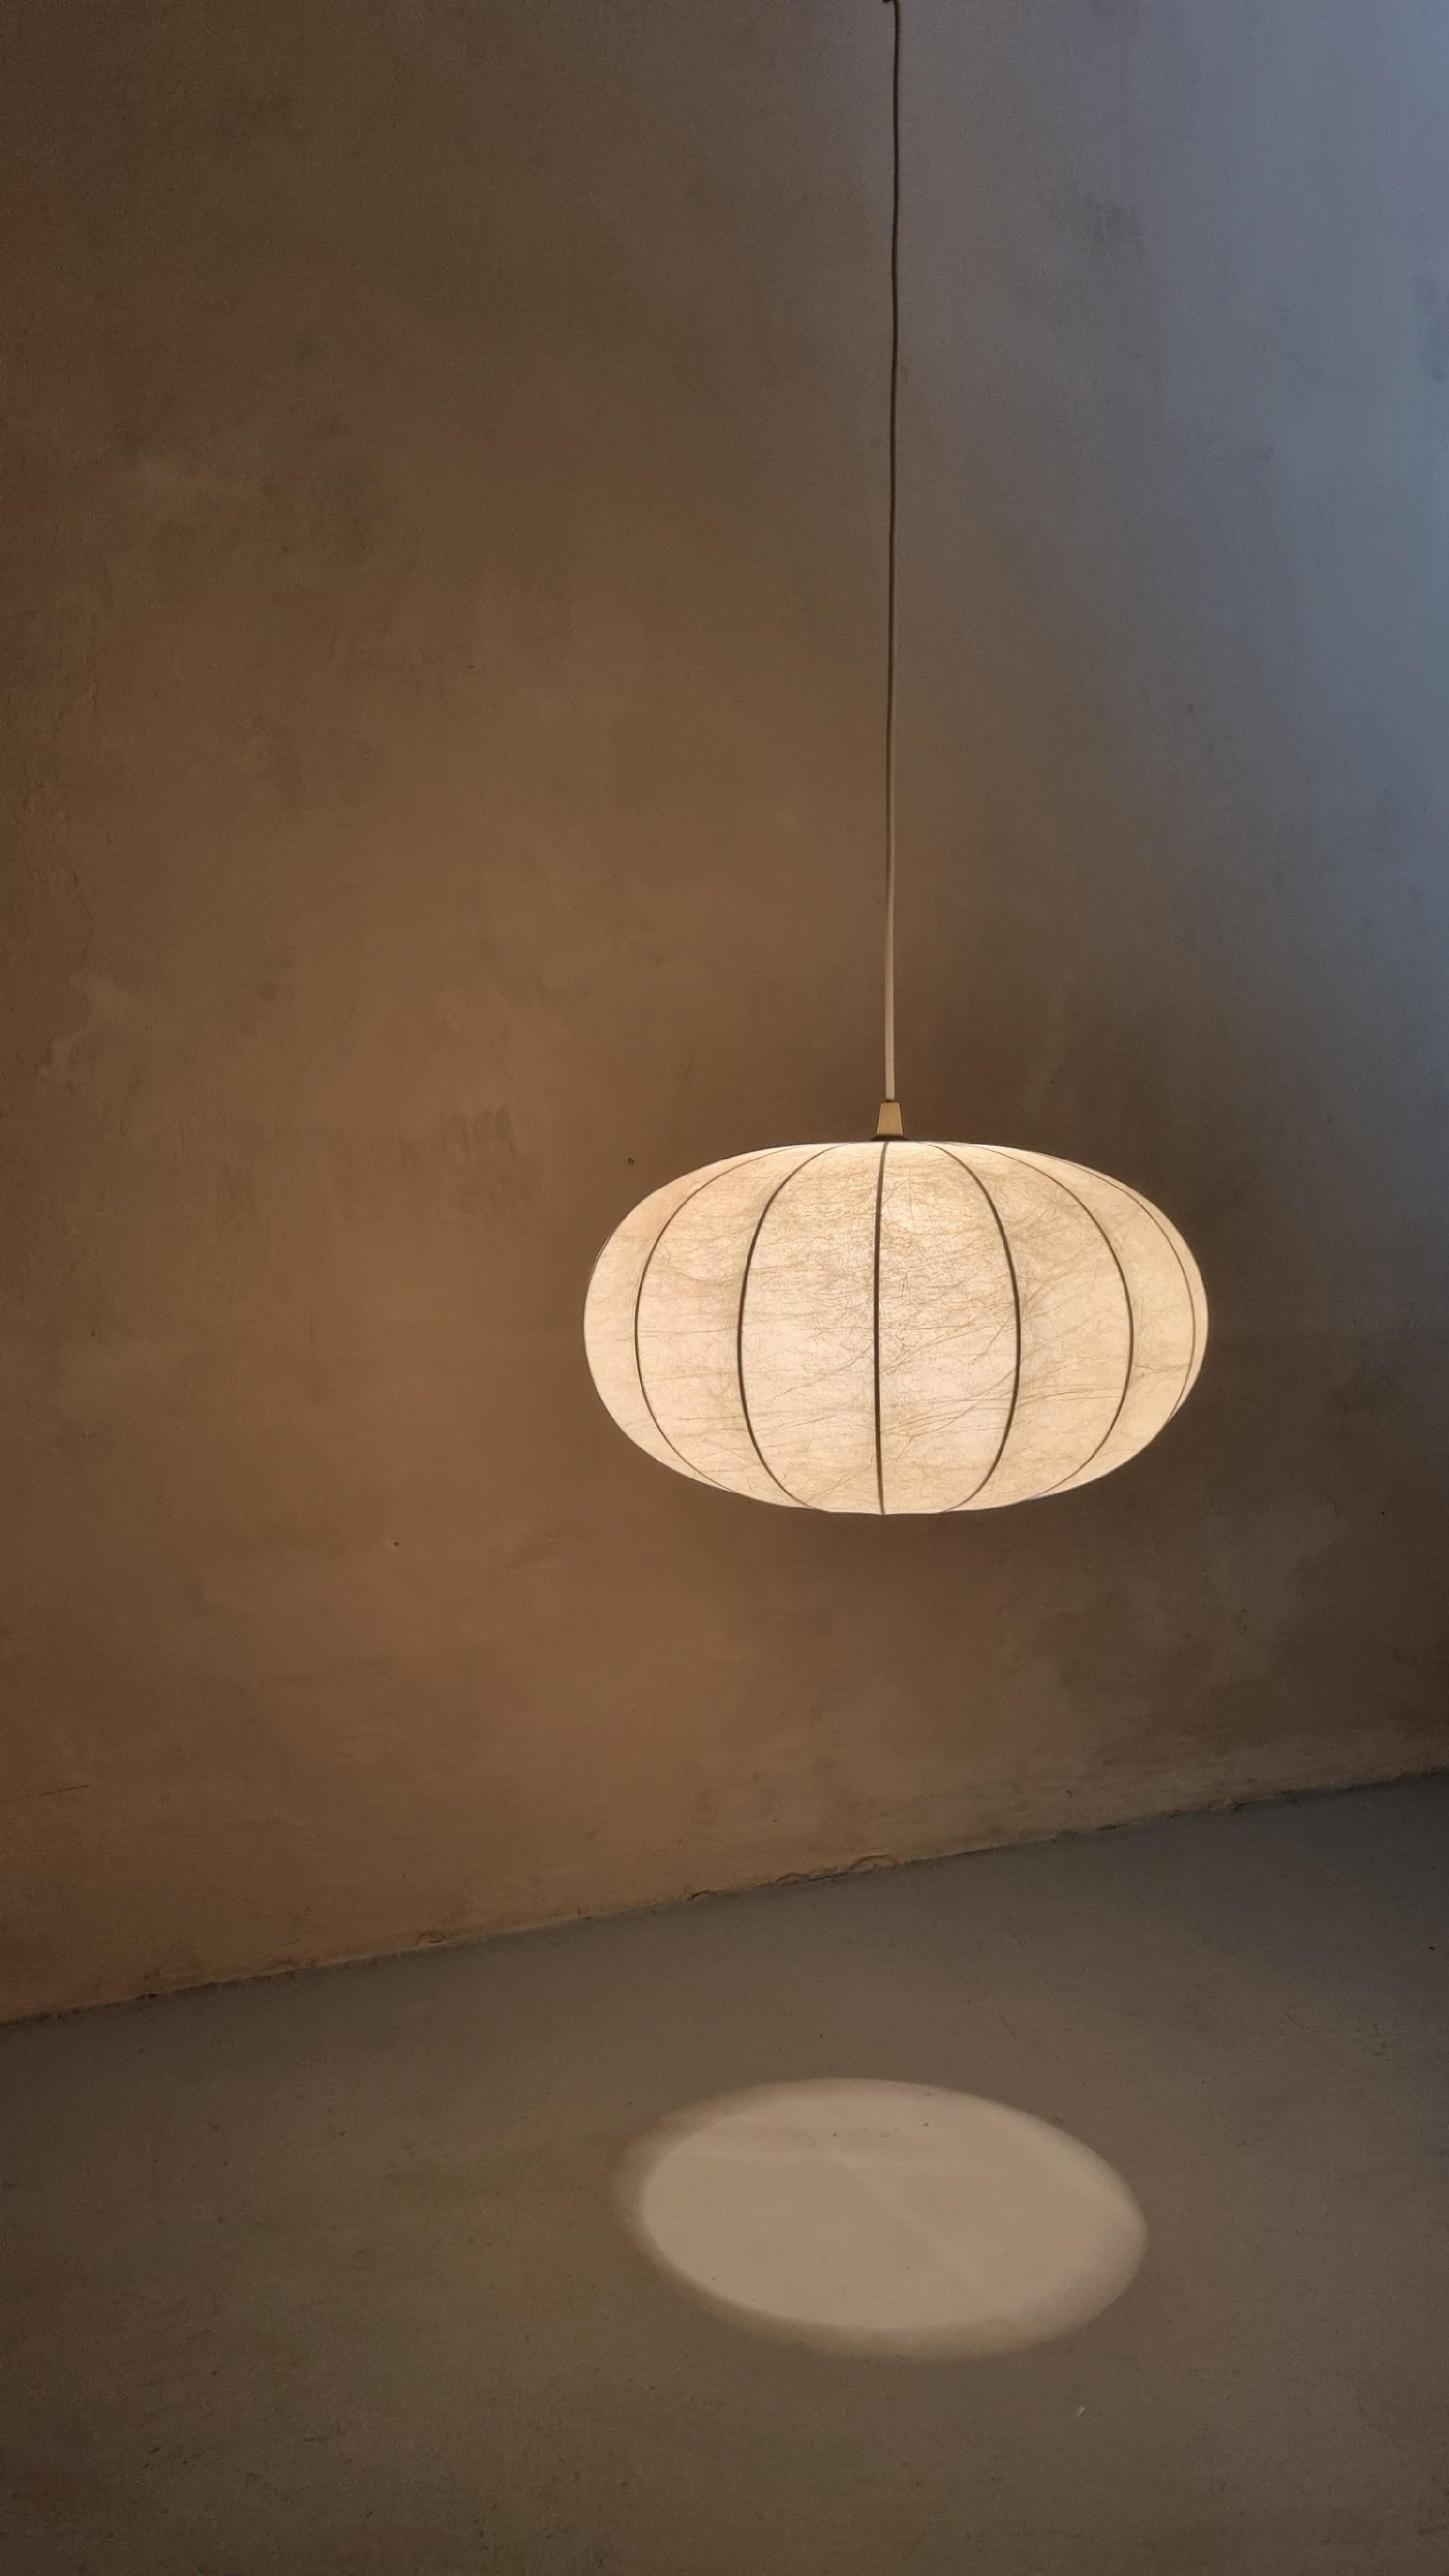 Mid-Century Modern Cocoon Suspension Lamp, Italian Manufacture, 1960s For Sale